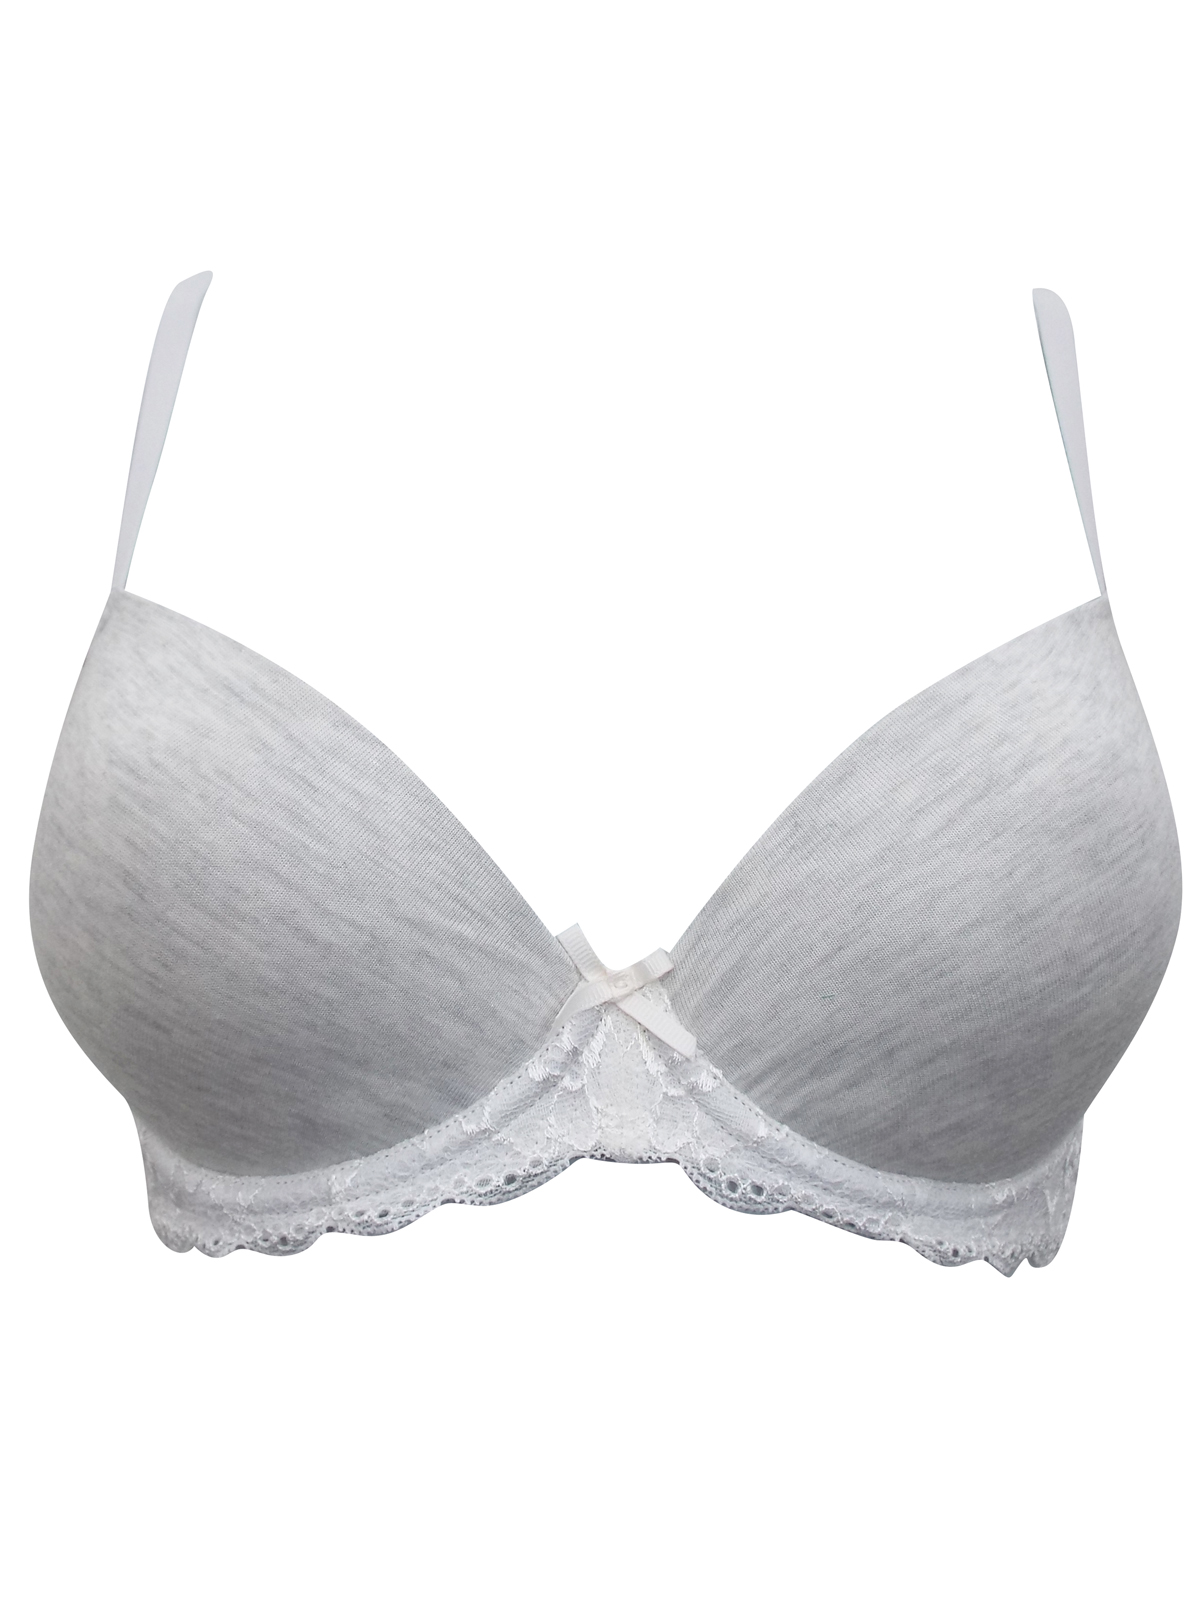 F&F - - F&F GREY Modal Blend Padded & Wired Full Cup Bra - Size 32 to ...